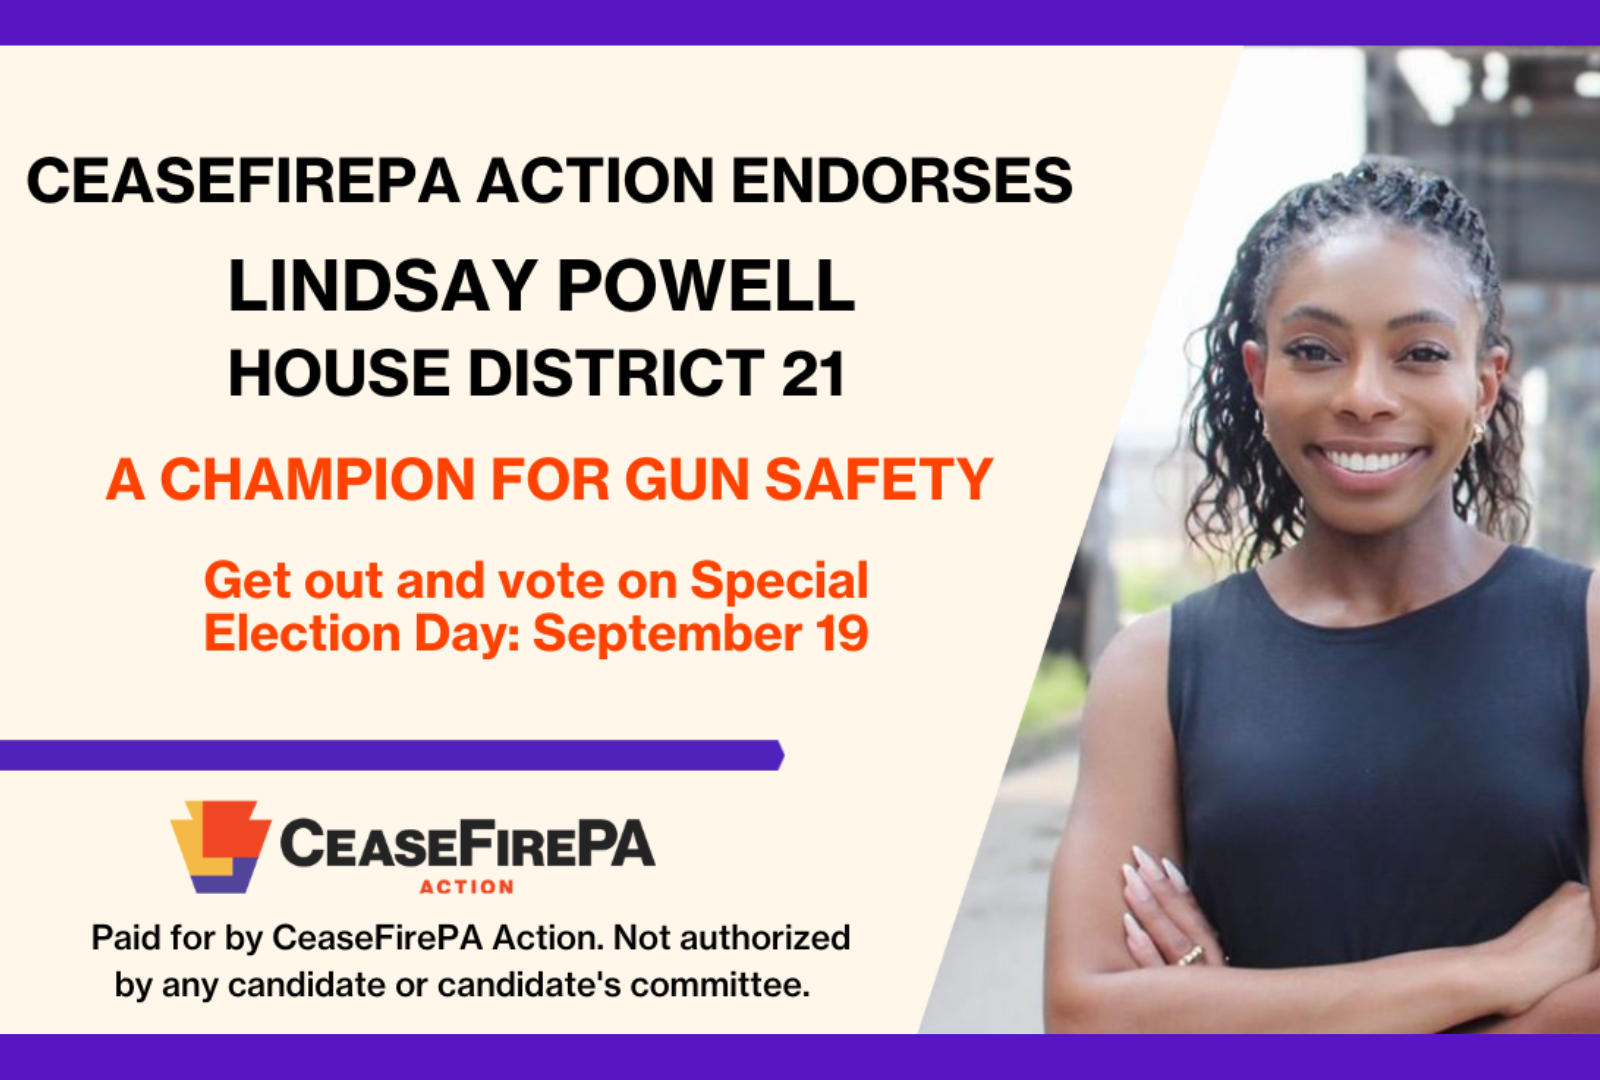 CeaseFirePA Action Endorses Gun Safety Champion Lindsay Powell for PA House of Reps